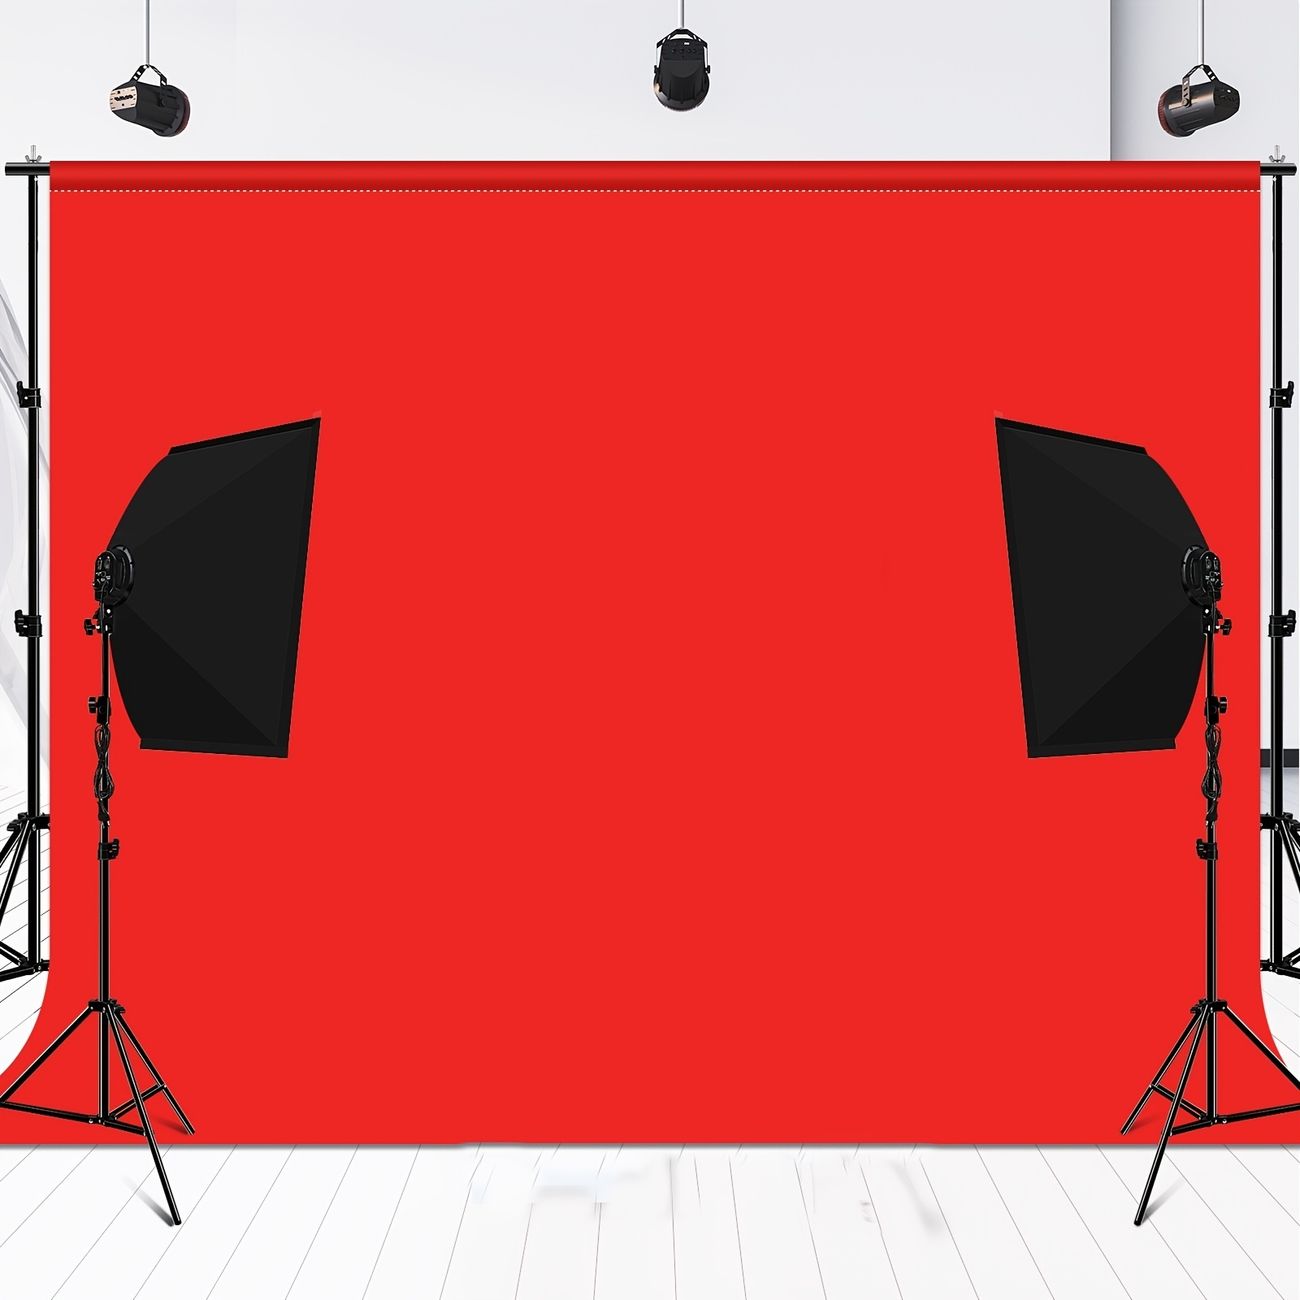 3Pieces 6x9 Feet Photo Studio Photography Muslin Cotton Collapsible Backdrop